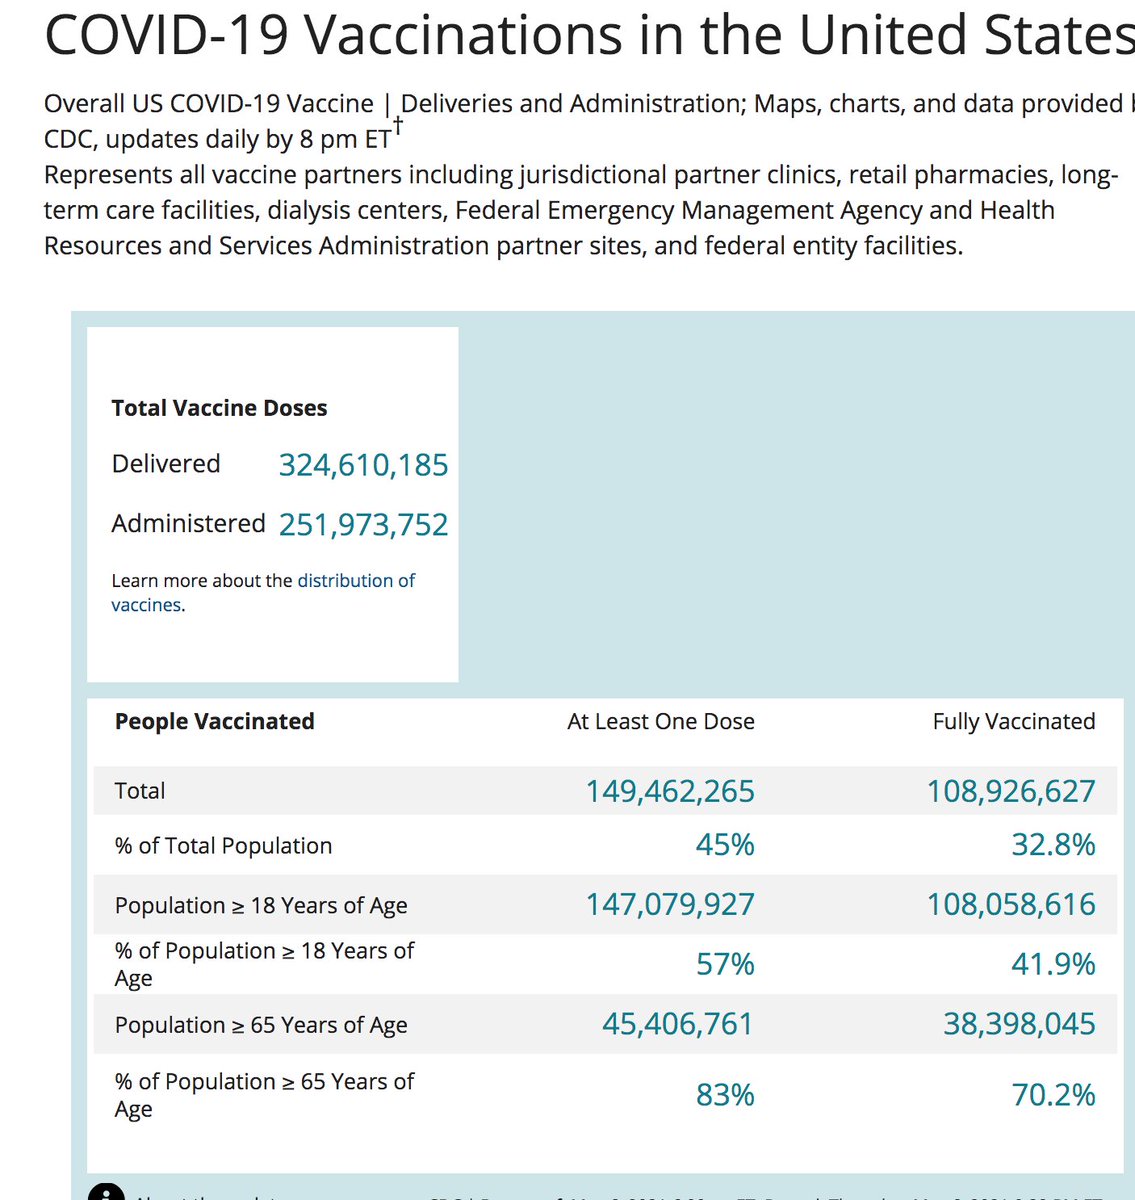 Sources for the numbers used: https://covid.cdc.gov/covid-data-tracker https://vaers.hhs.gov/ 